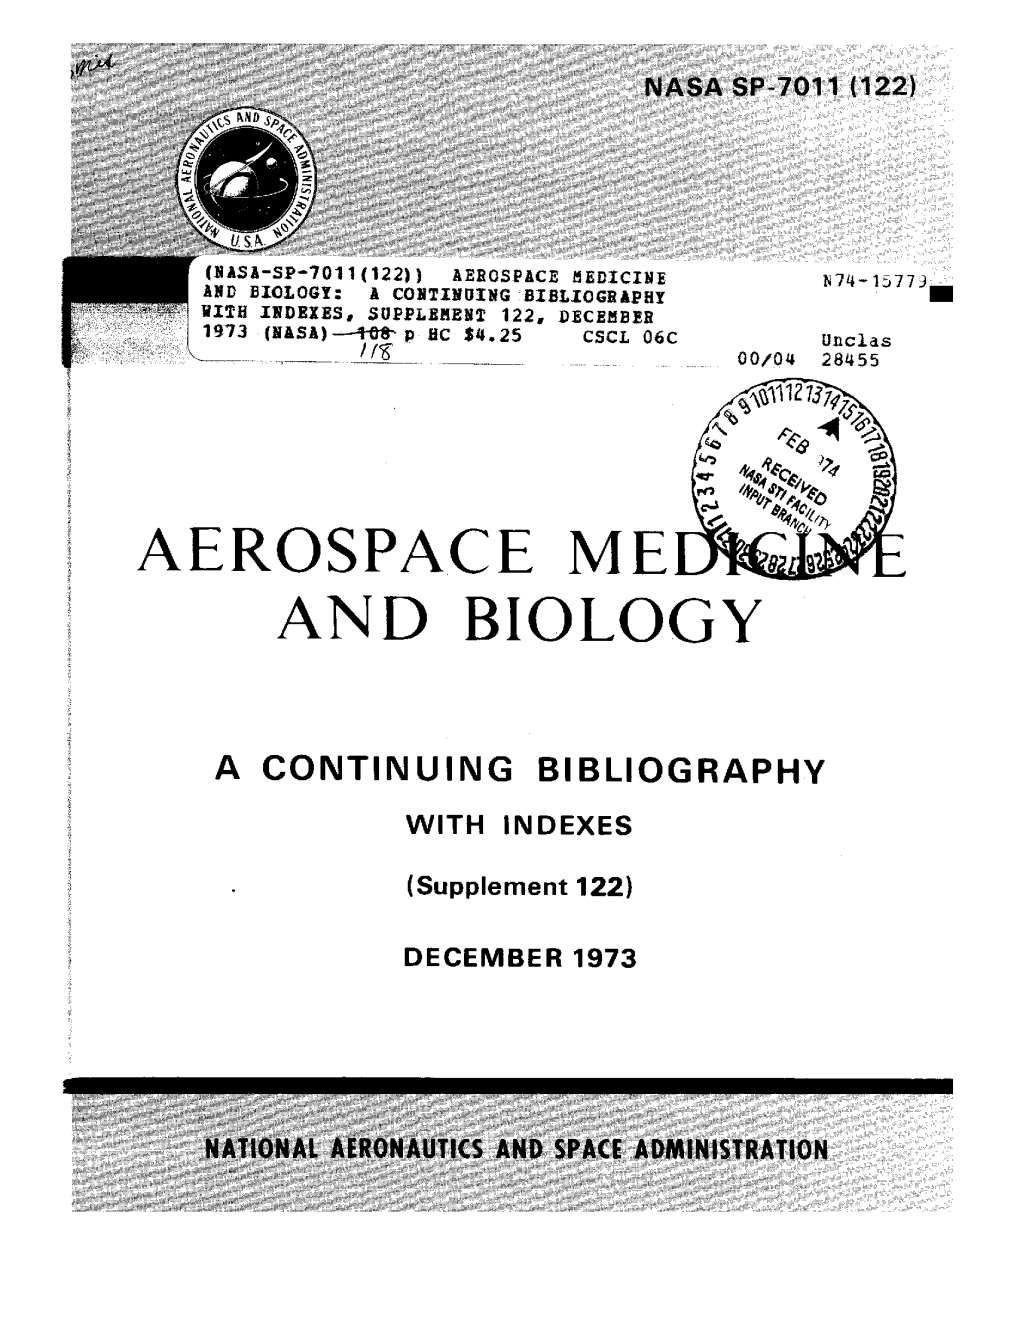 AND BIOLOGY: a CONTINUING BIBLIOGRAPHY with INDEXES, SUPPLEMENT 122, DECEMBER 1973 (NASA) --4 P HC $4.25 CSCL 06C Unclas